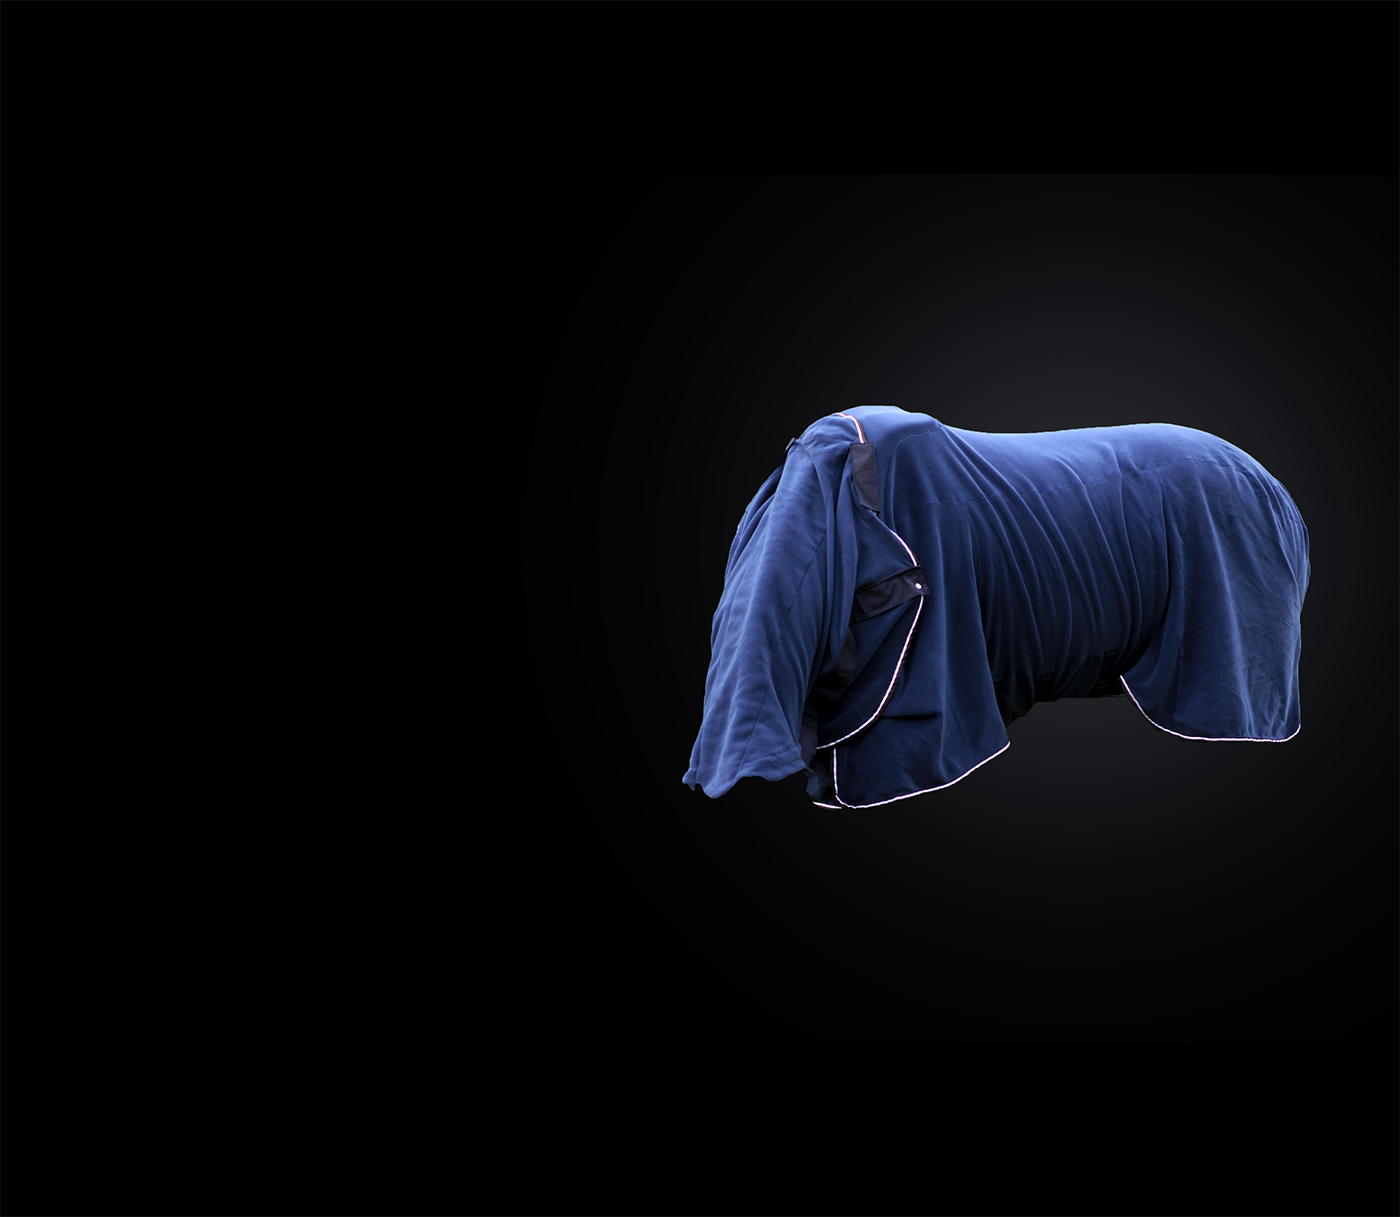 Innovative Horse rug Hocket in blue with a horse having the head down with black background floating